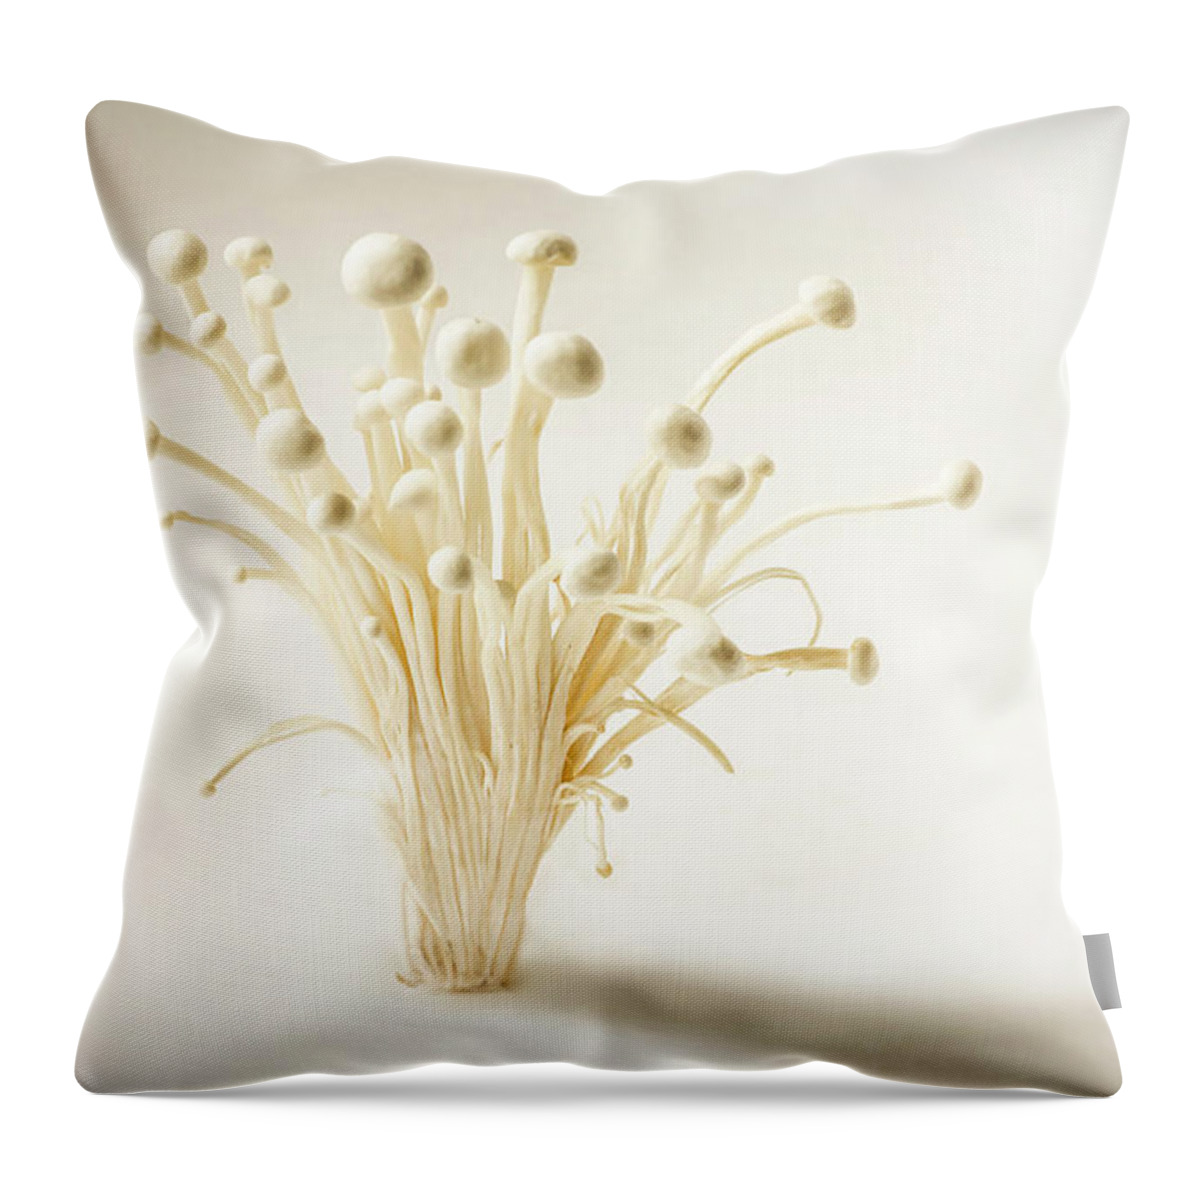 Still Life Throw Pillow featuring the photograph Explorers by Maggie Terlecki